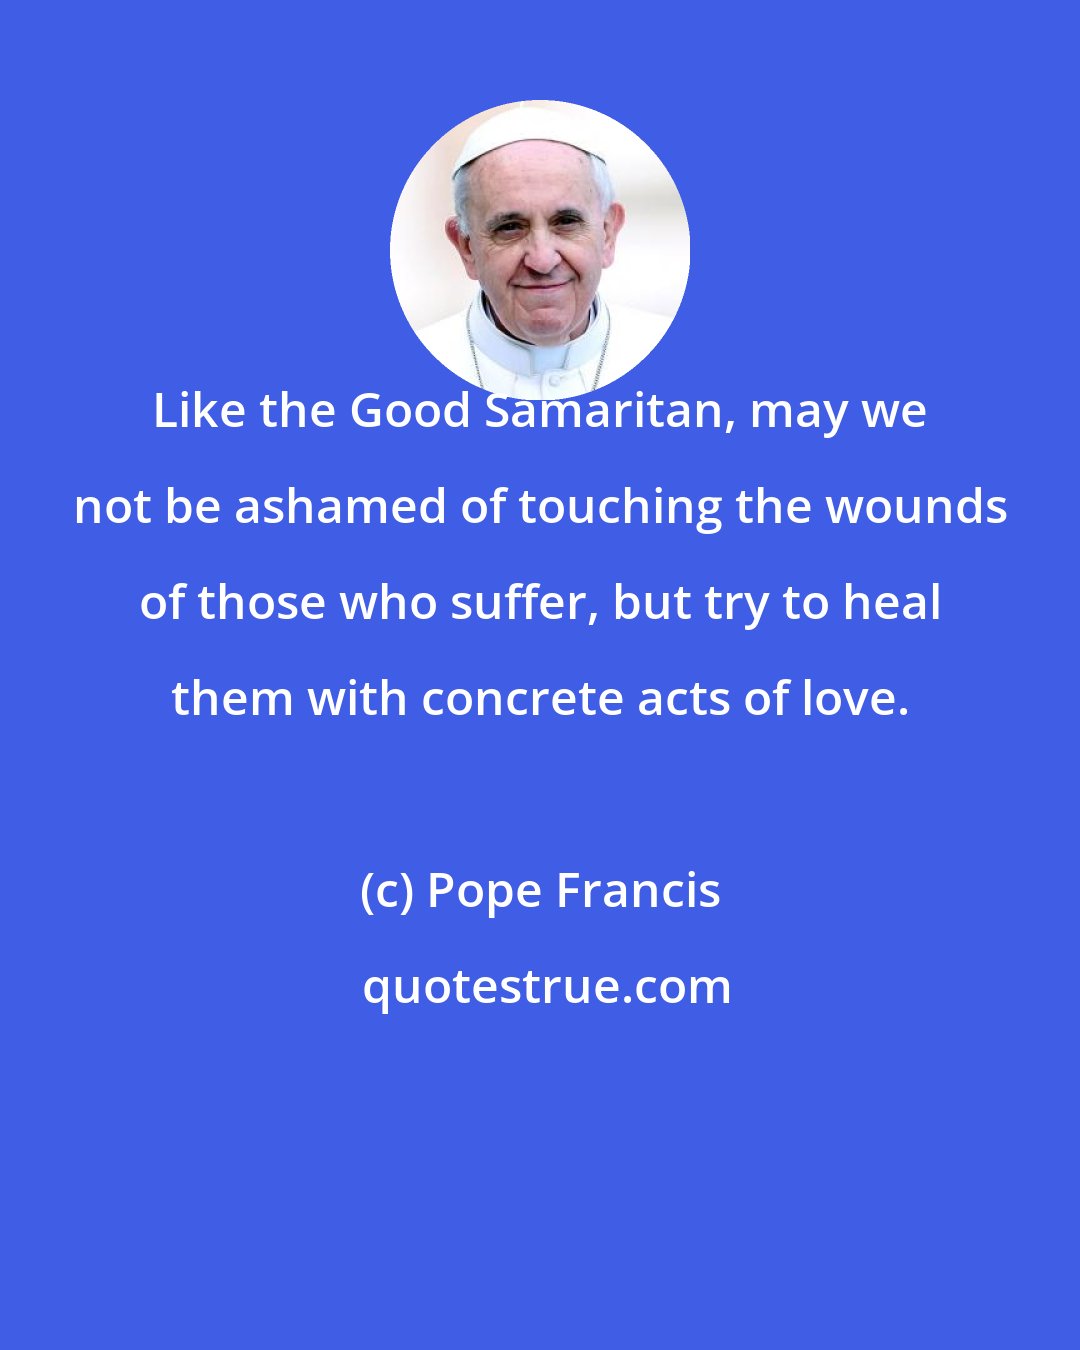 Pope Francis: Like the Good Samaritan, may we not be ashamed of touching the wounds of those who suffer, but try to heal them with concrete acts of love.